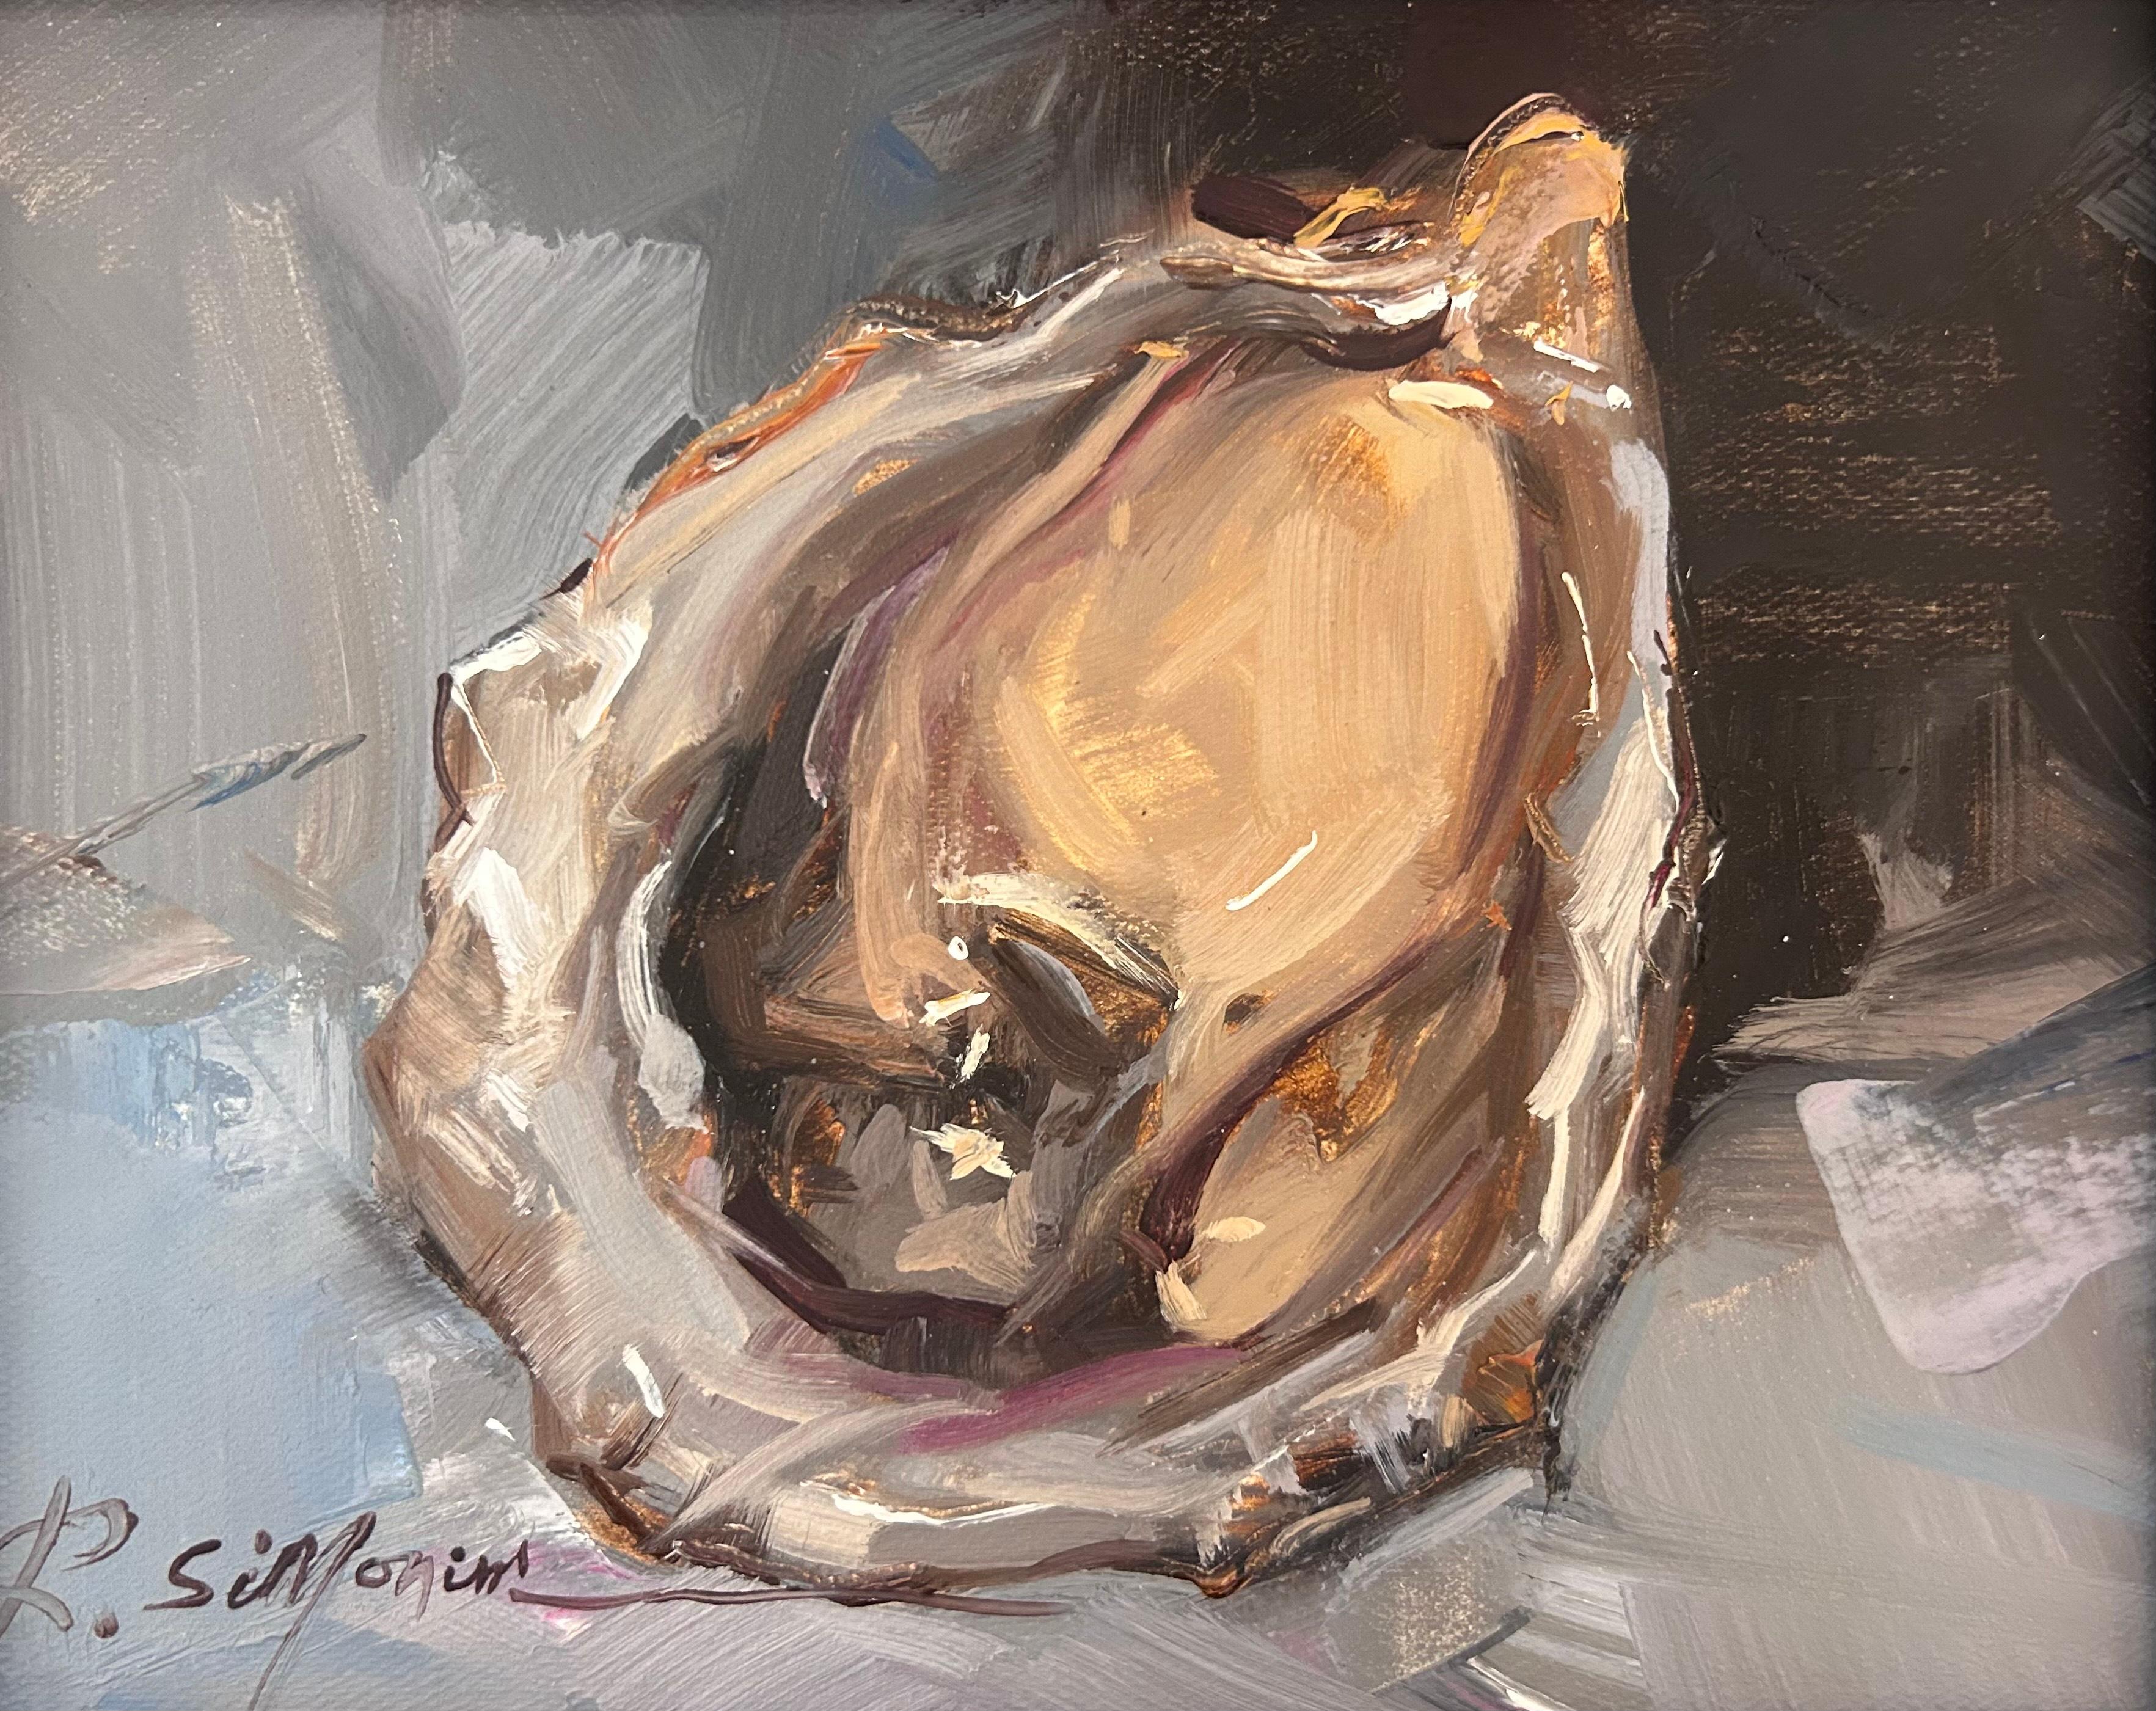 This painting by artist Ray Simonini titled "Shucked" is a 8x10 nautical oil painting on canvas featuring a close-up of an oyster shell against a calm soft grey and cool vibrant blue background.

About the artist:
Simonini was born in China in 1981.